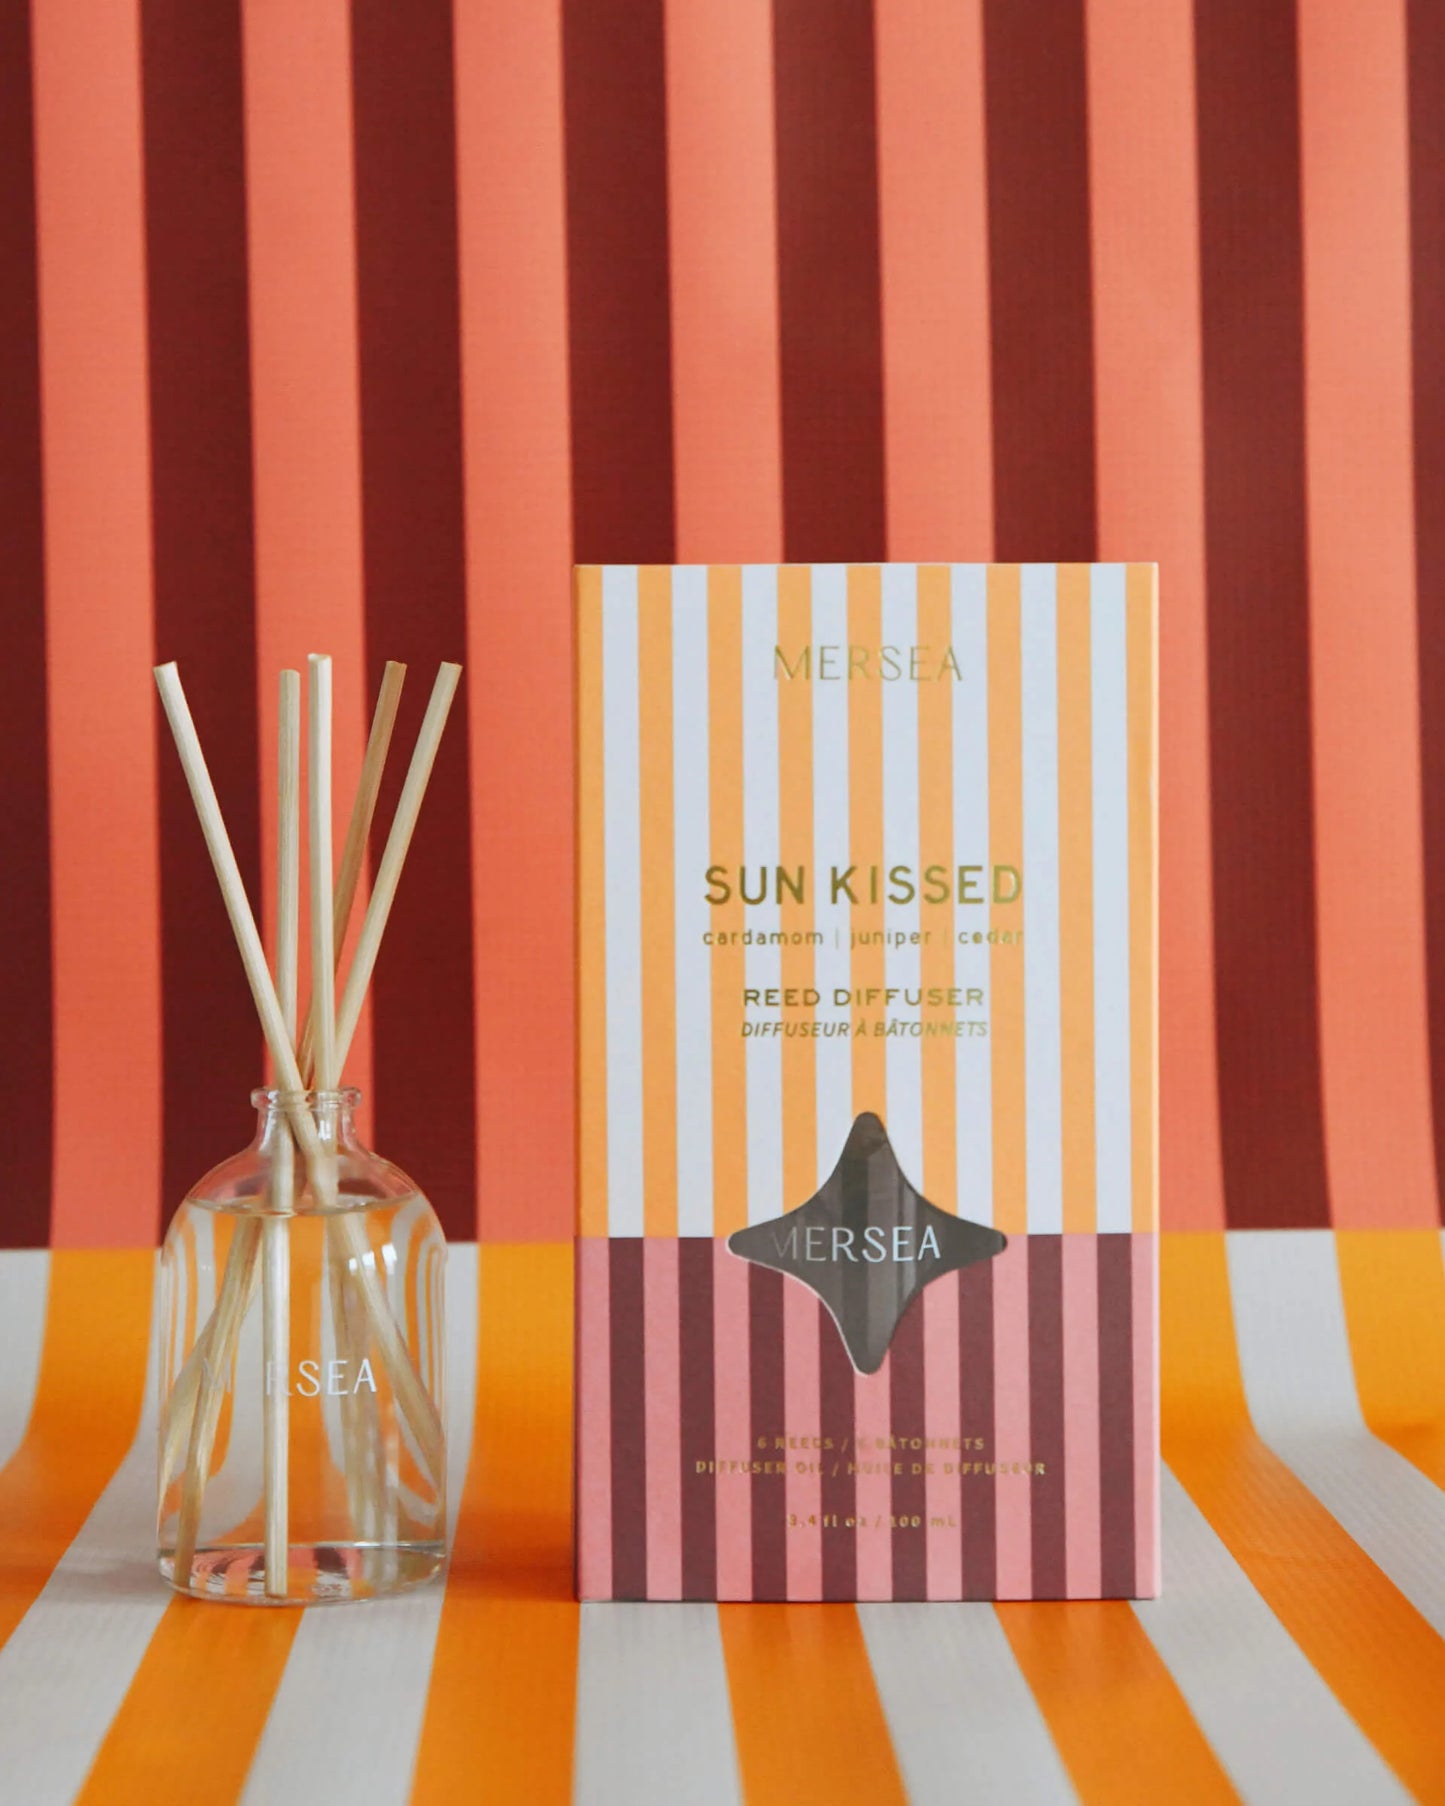 Mersea Scented Reed Diffuser